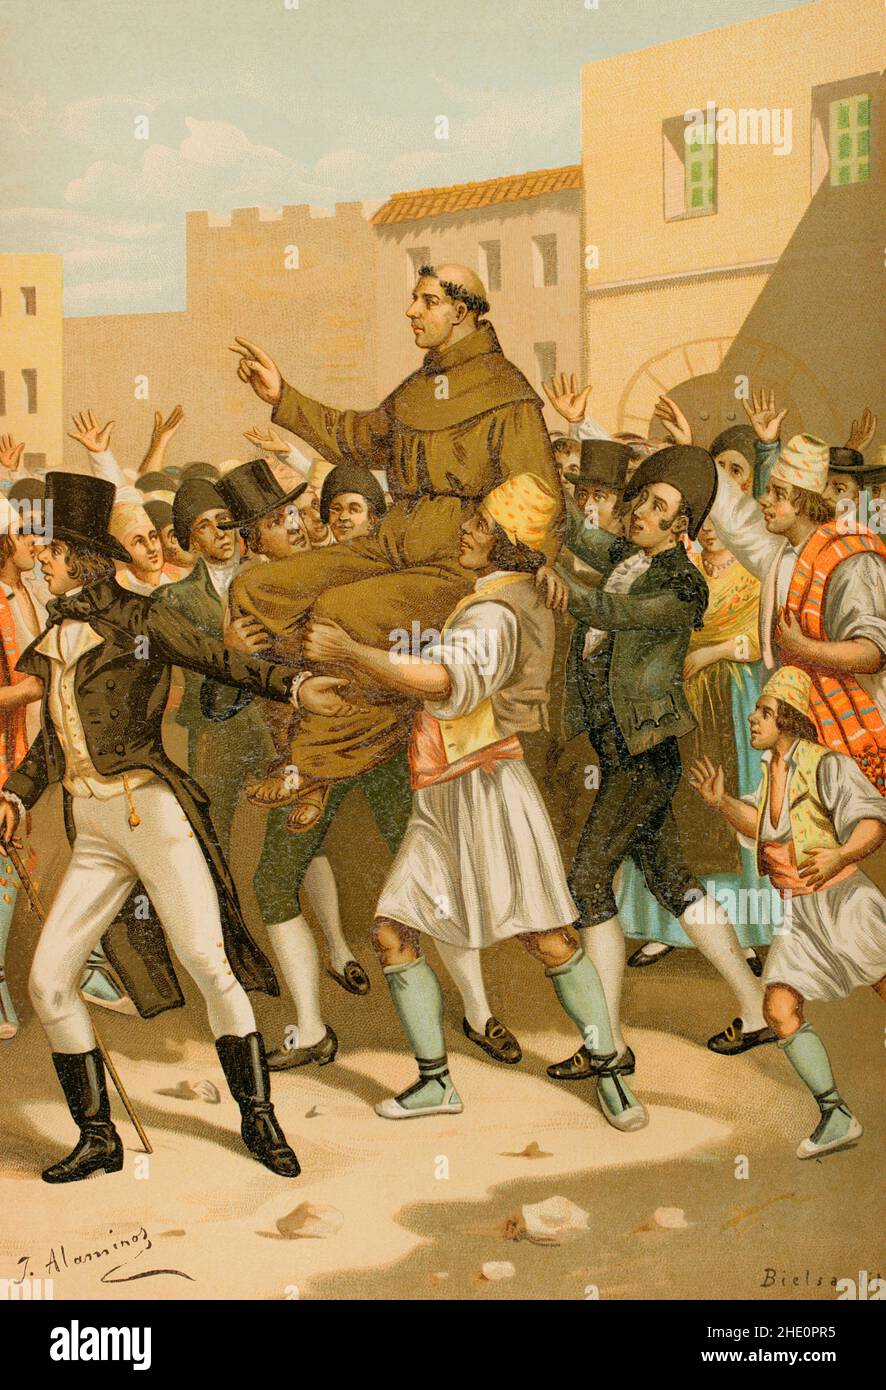 History of Spain. War of Independence (1808-1814). Revolution of Valencia in 1808 (23 May to 28 October 1808). The Franciscan priest Juan Rico y Vidal had a significant role in the uprising against the French that took place in Valencia on 23 May 1808. The priest Rico is carried in triumph to the door of the audience. Illustration by J. Alaminos. Chromolithography. 'Historia General de España' (General History of Spain), by Miguel Morayta. Volume VII. Madrid, 1893. Stock Photo